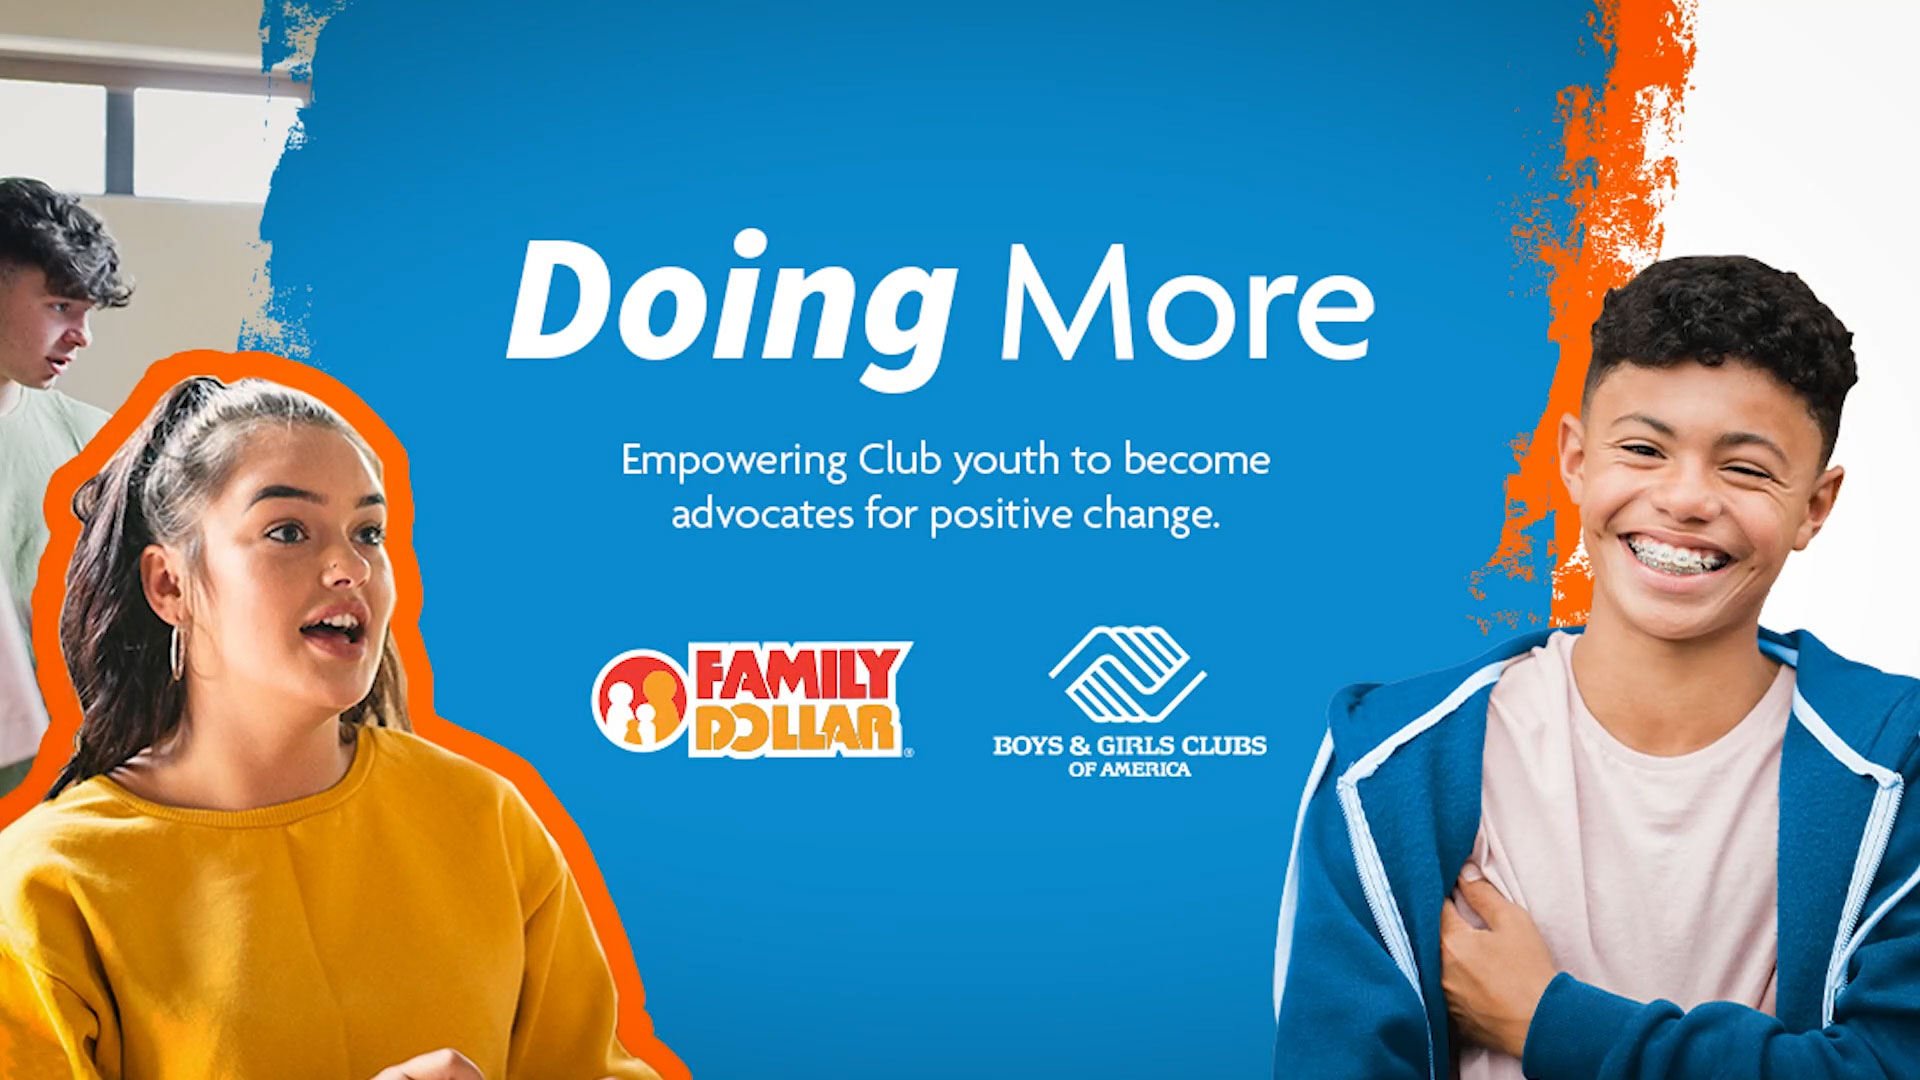 In 2023, Family Dollar will support the youth development organization with a new focus on supporting the Think, Learn, Create Change (TLC) platform, designed to empower Boys & Girls Club members to act on critical issues and become change agents through creation and implementation of their own TLC-backed local advocacy project.